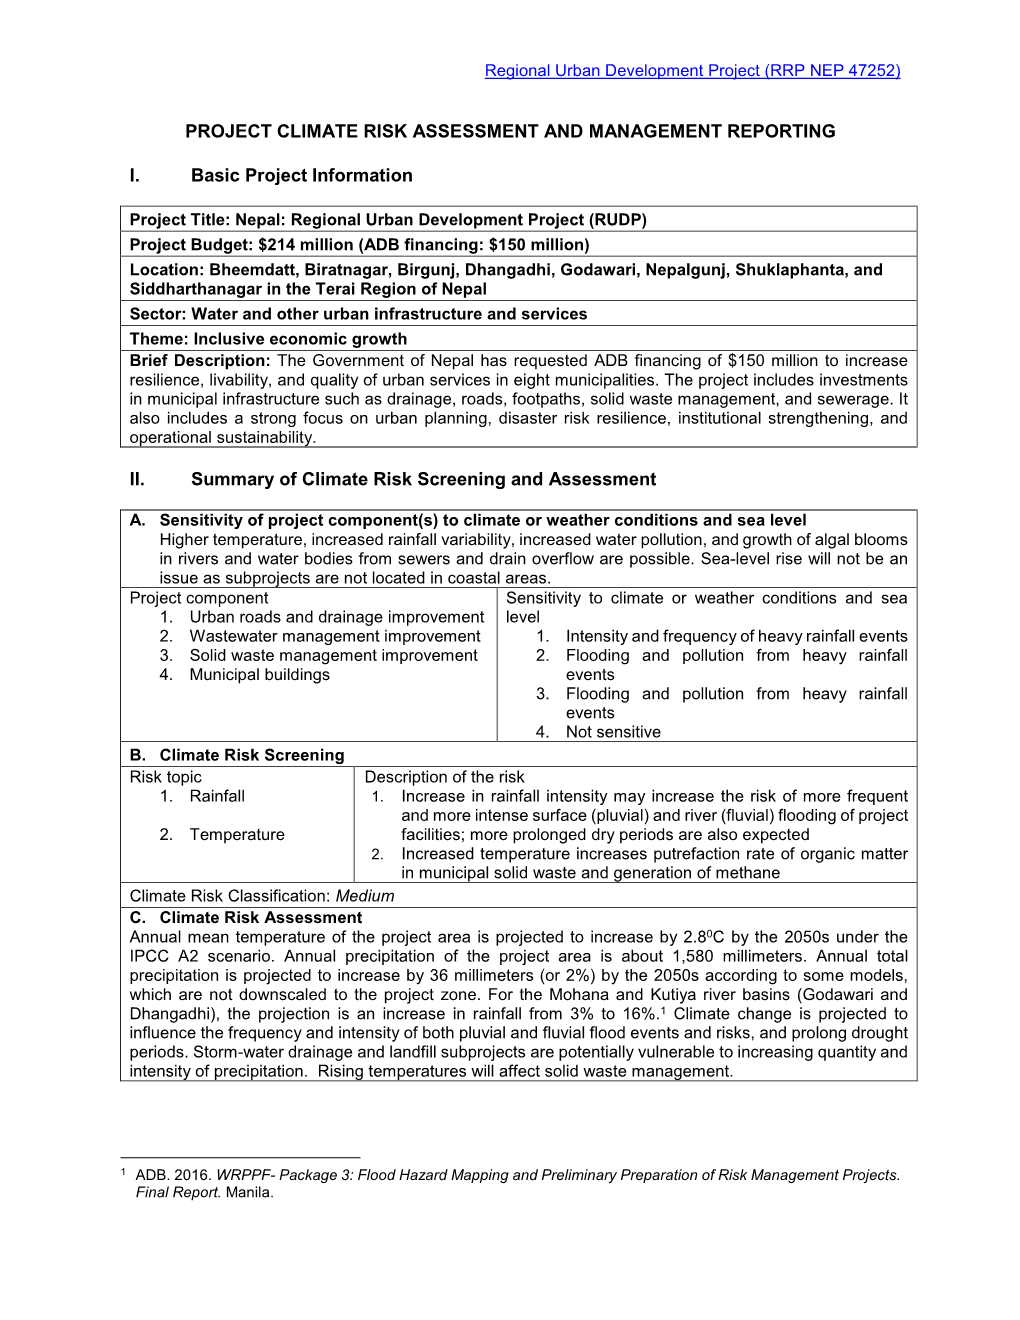 PROJECT CLIMATE RISK ASSESSMENT and MANAGEMENT REPORTING I. Basic Project Information II. Summary of Climate Risk Screen